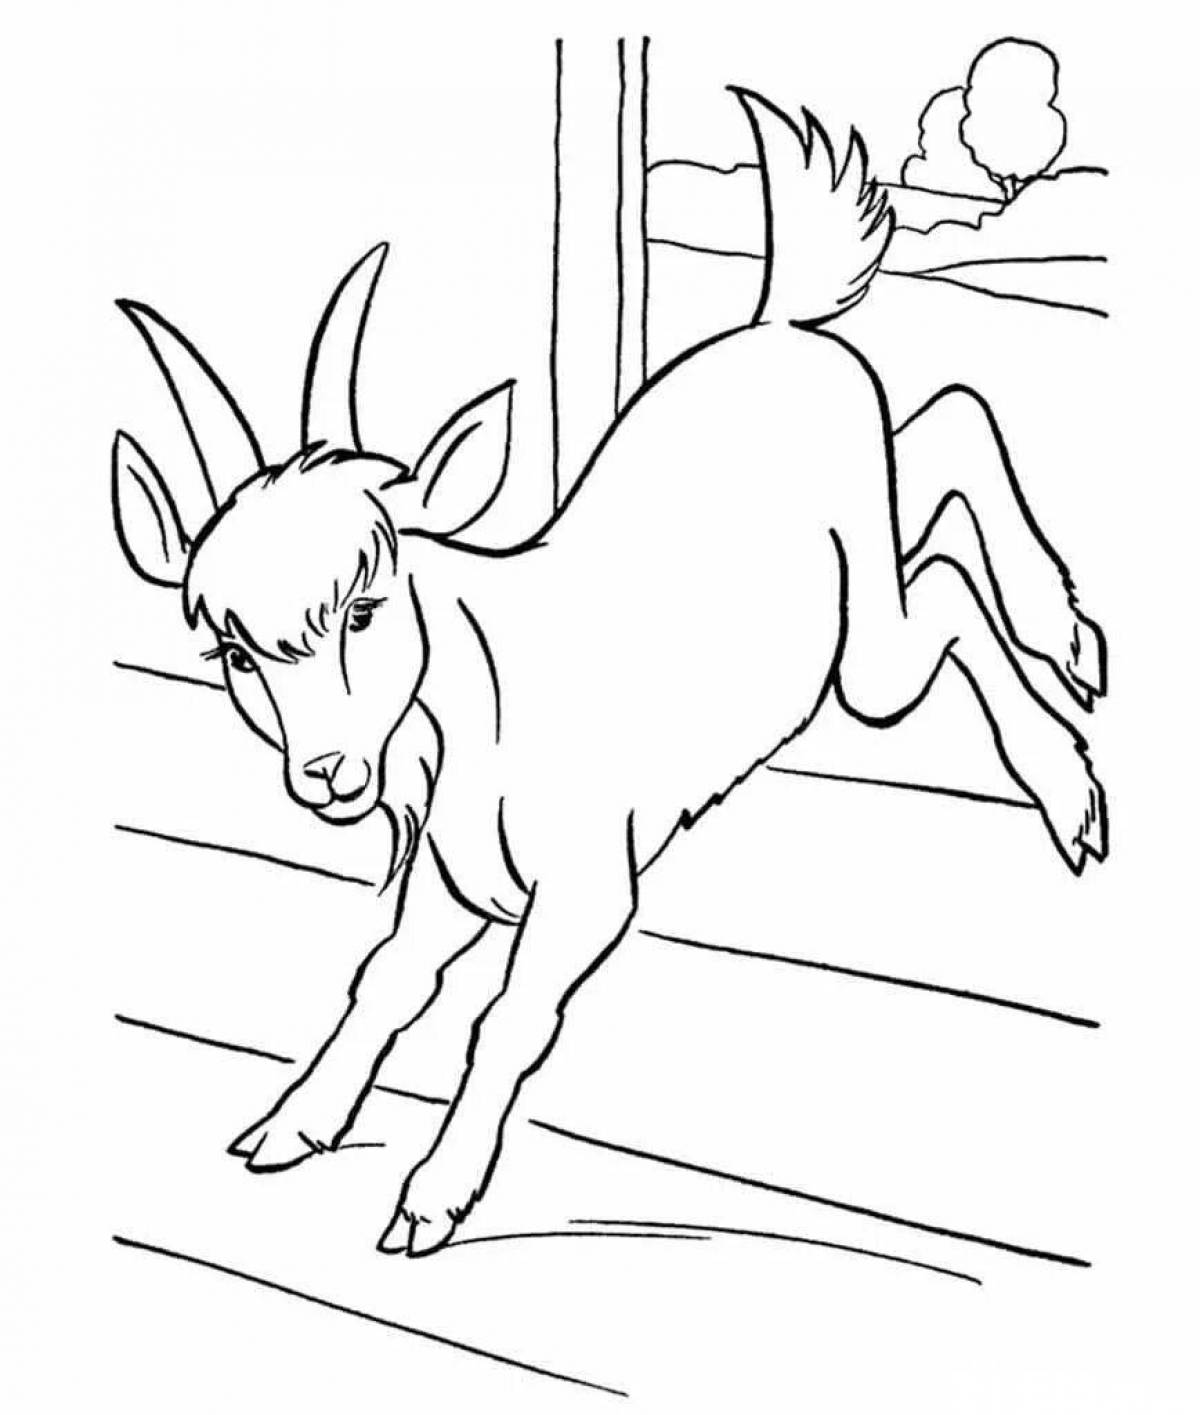 A fun goat coloring book for kids